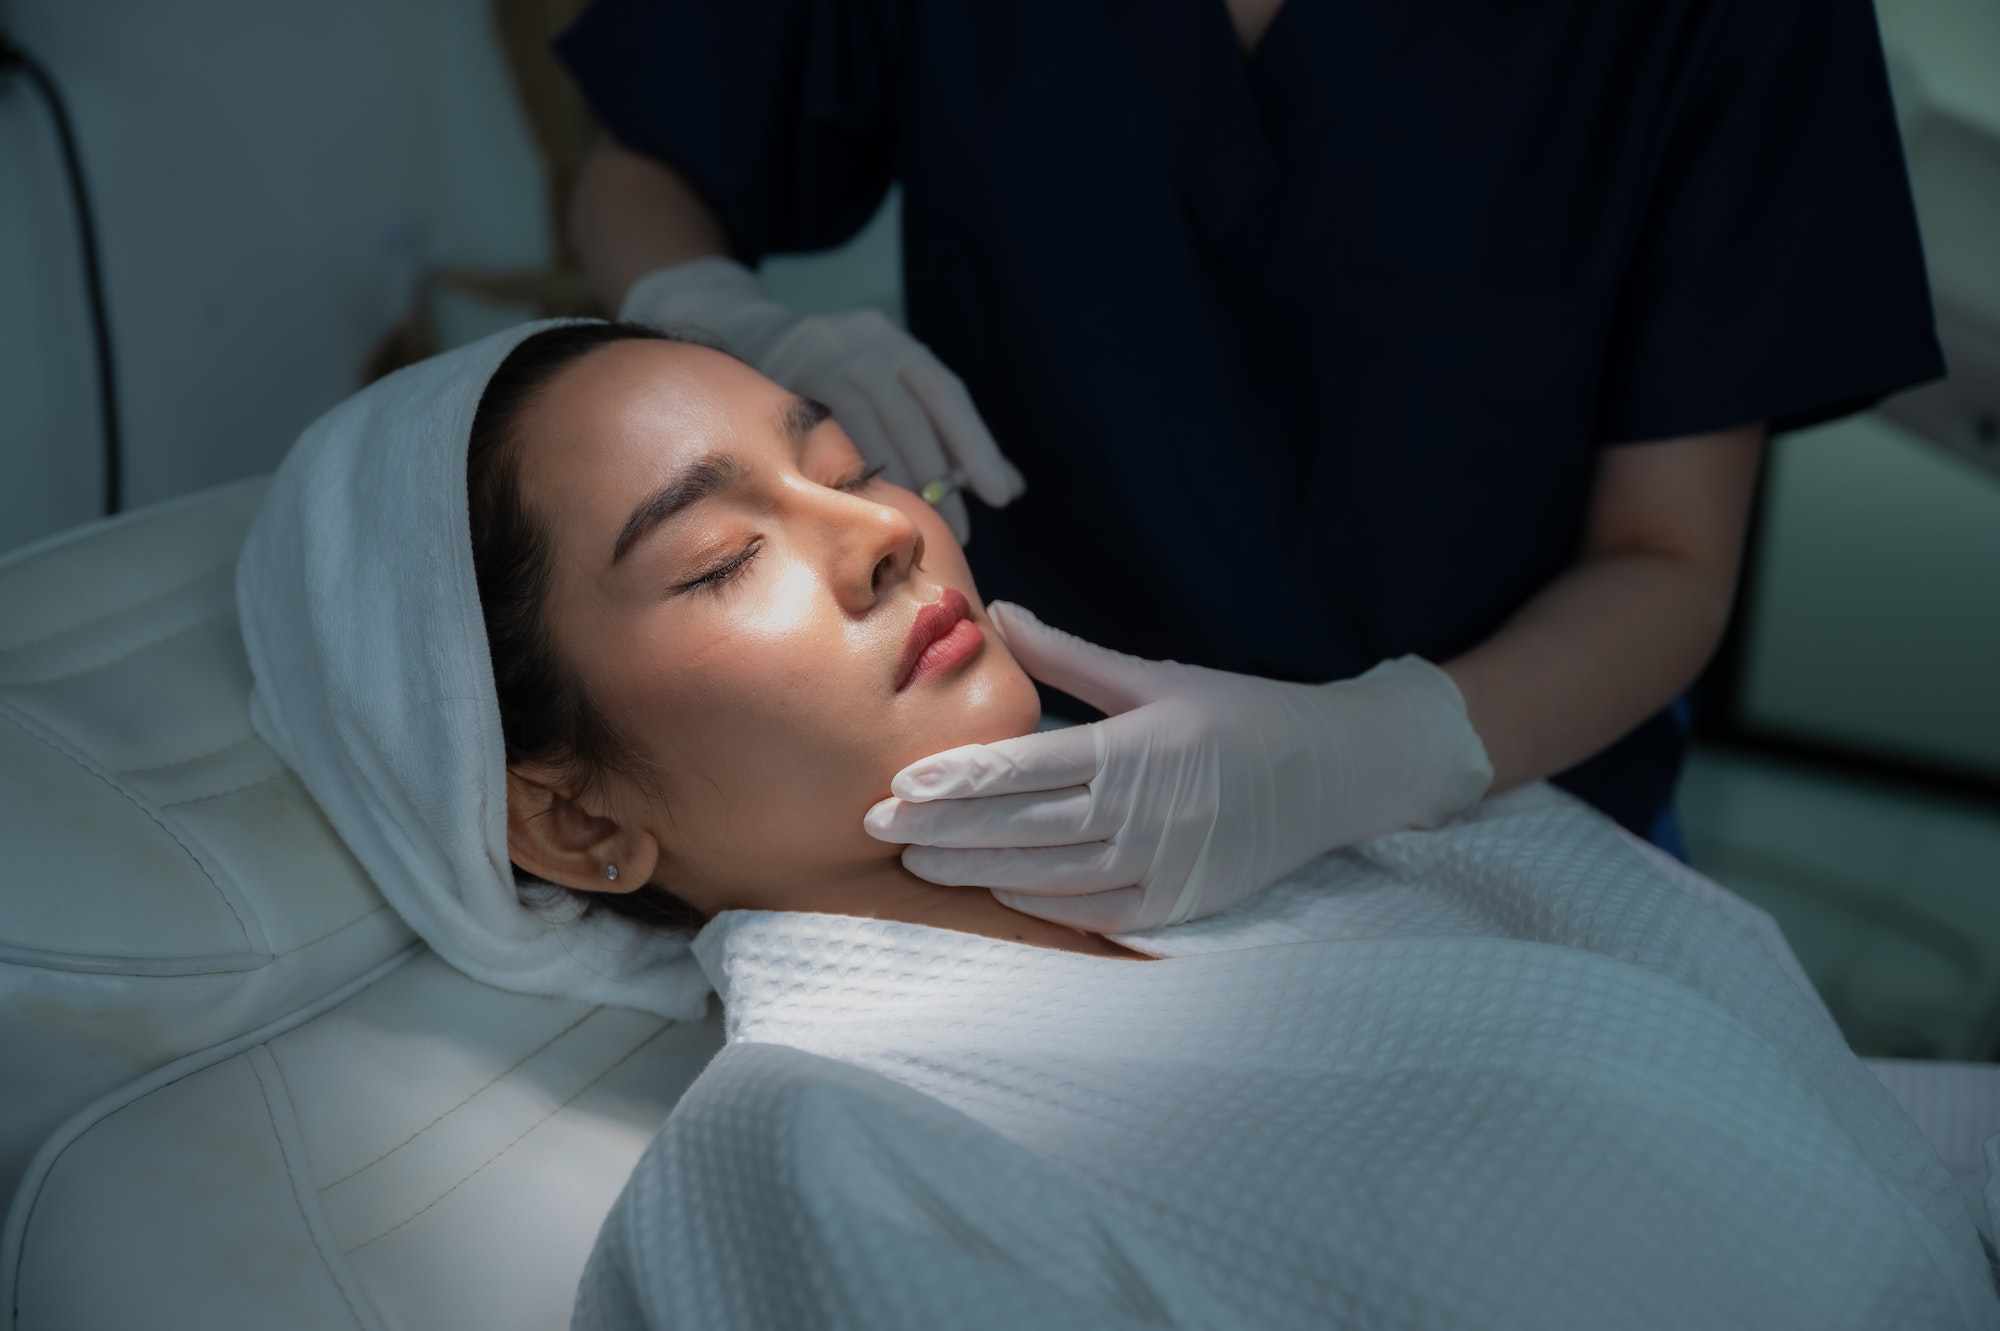 young Asian woman making cosmetology treatment skin injection, Mesotherapy of face beauty care